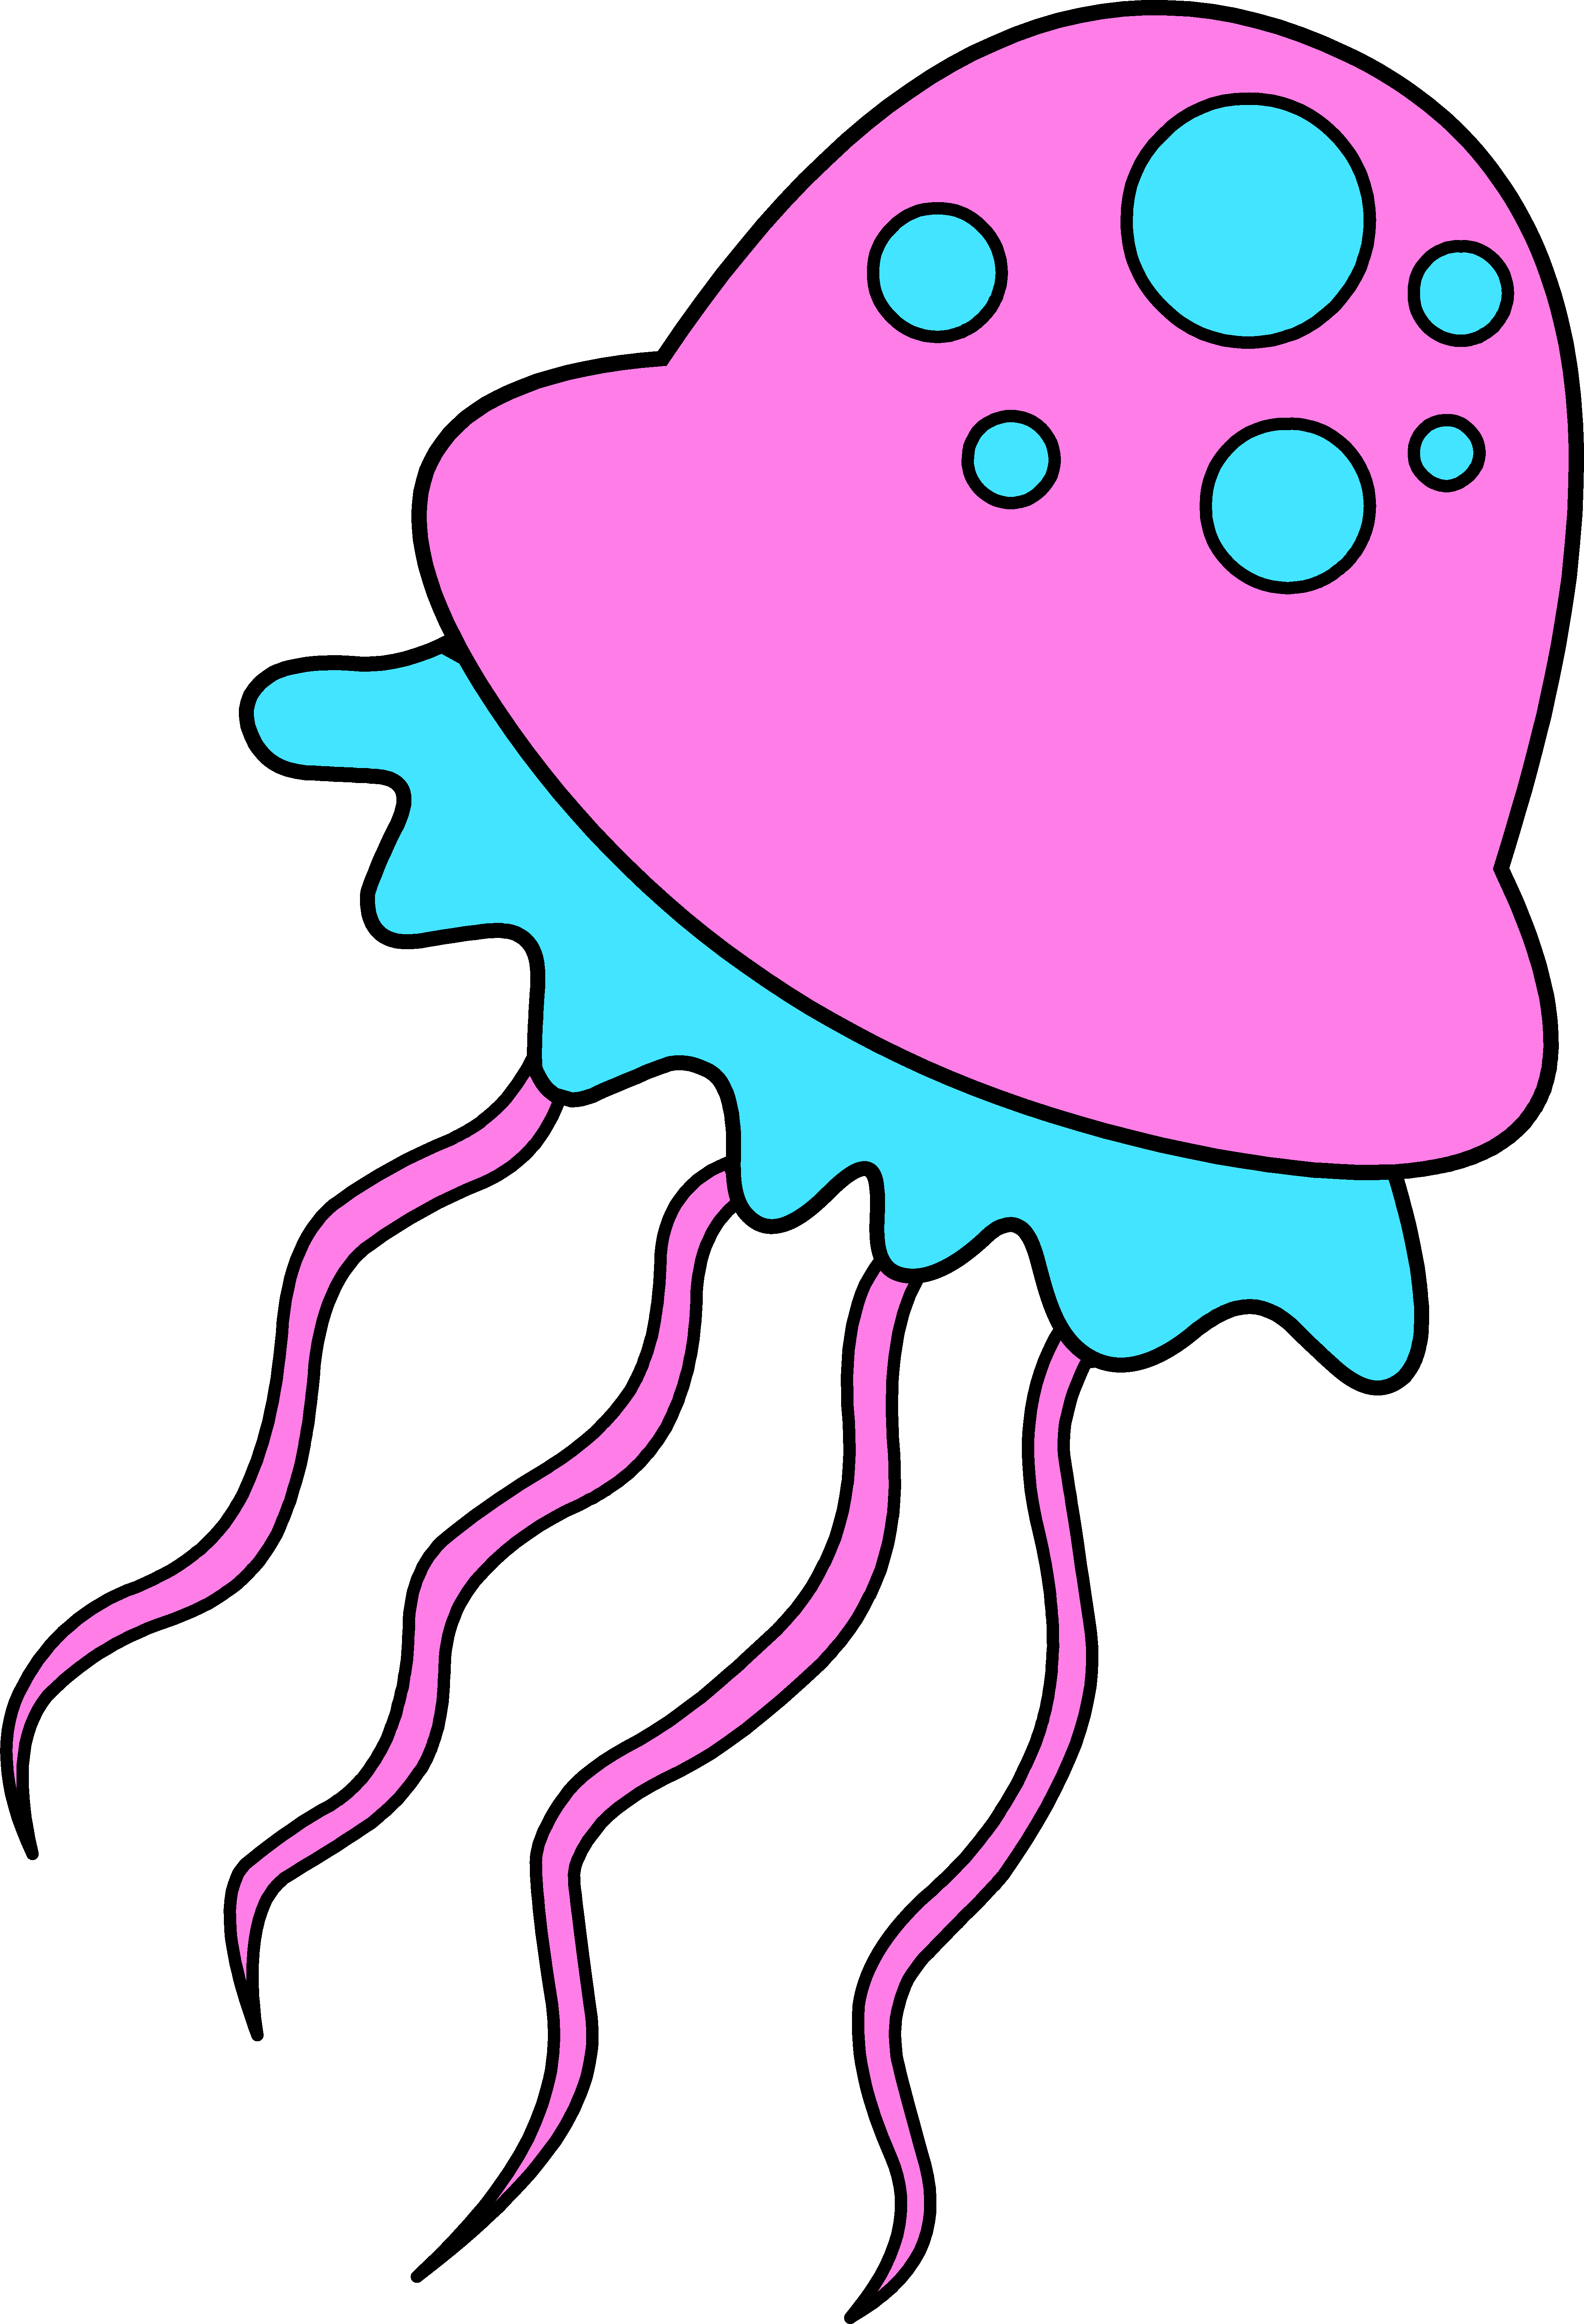 Jellyfish clipart #3, Download drawings